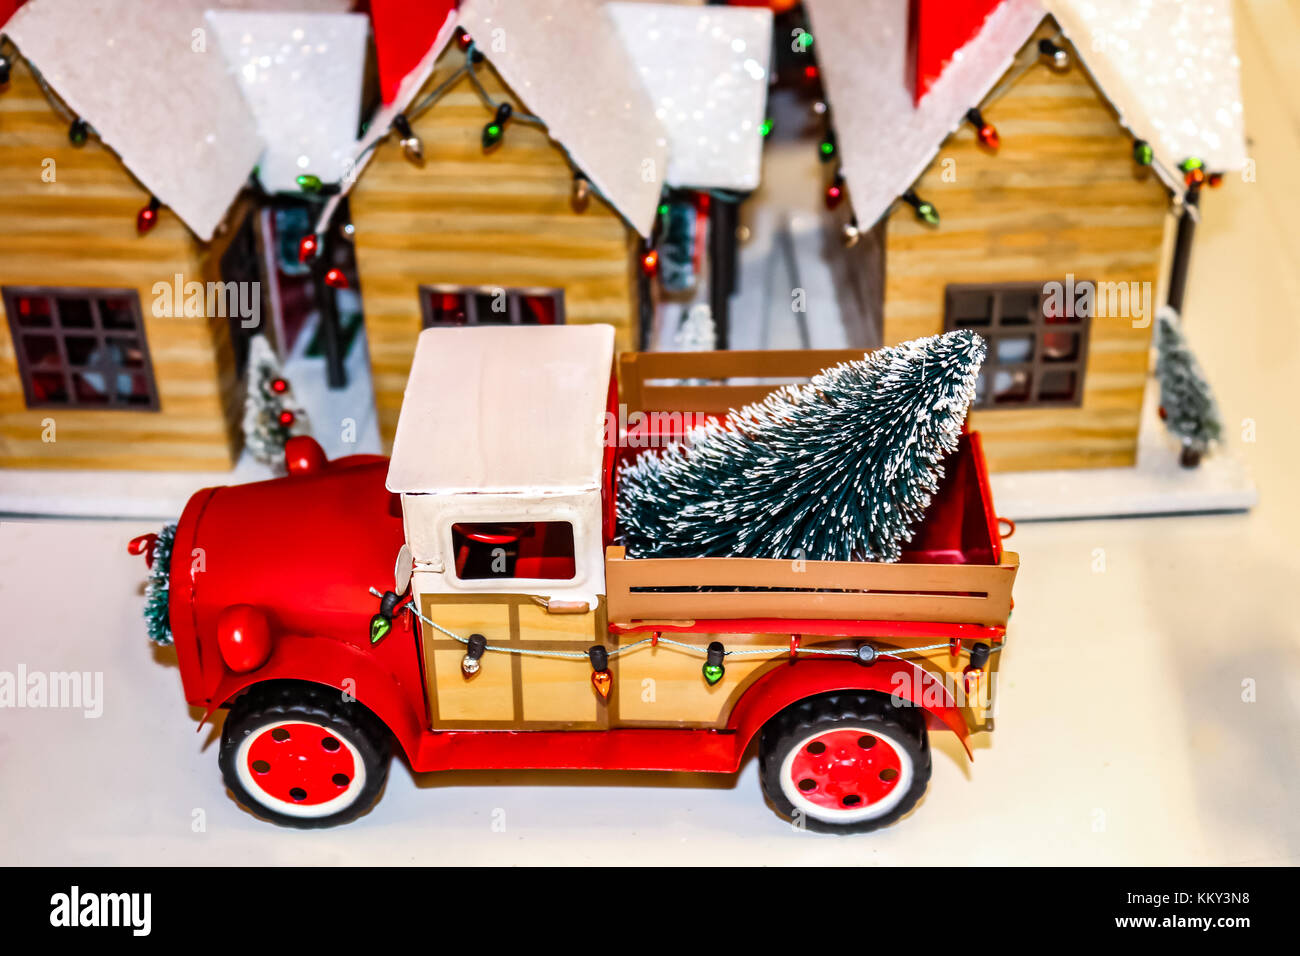 Vintage red toy pickup truck with Christmas lights and tree in back.jpg in front of a toy country Christmas village Stock Photo